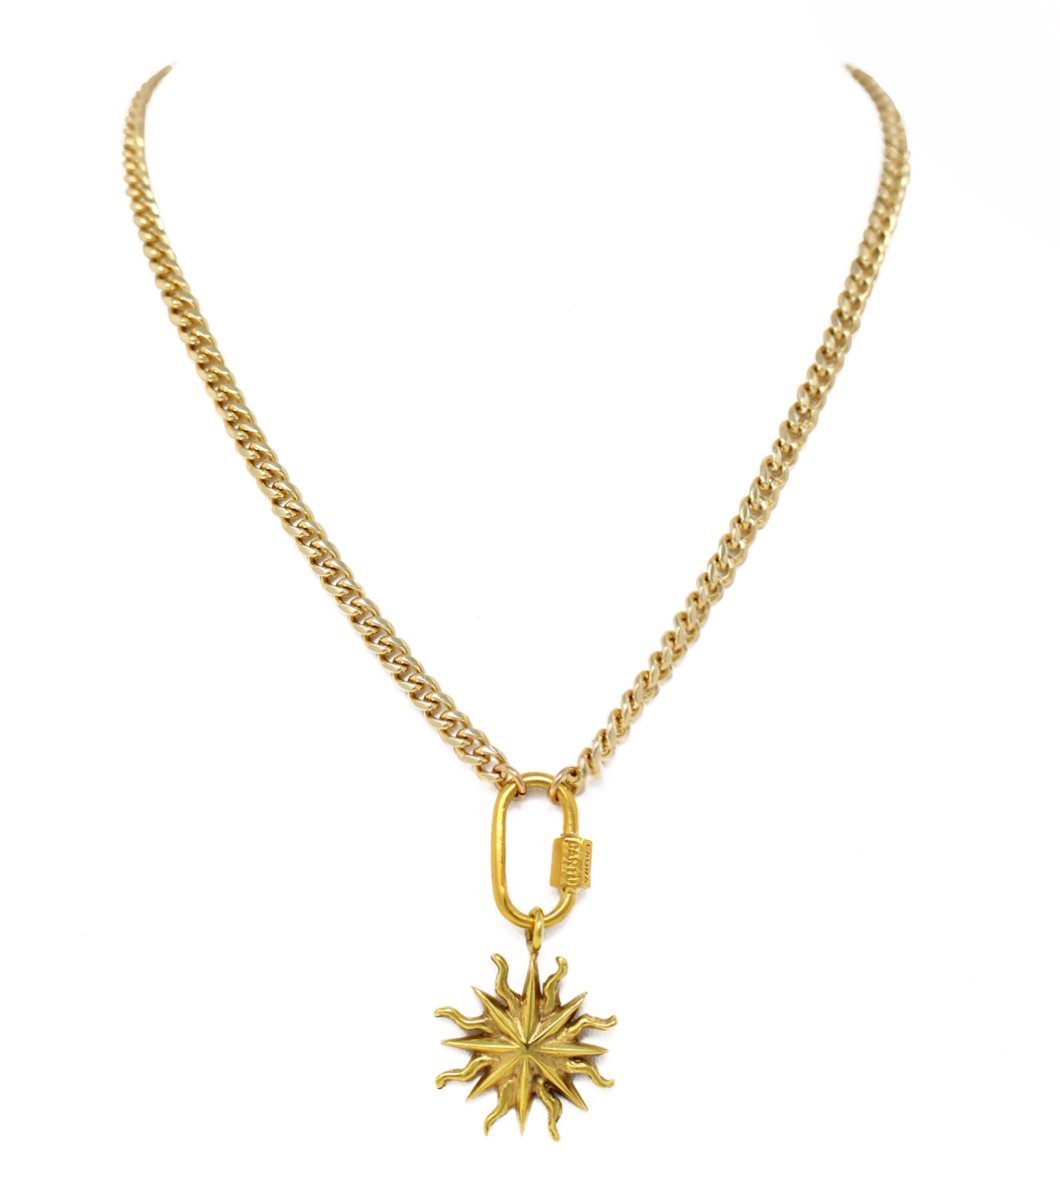 Eight Pointed Star Necklace - LAURA CANTU JEWELRY US